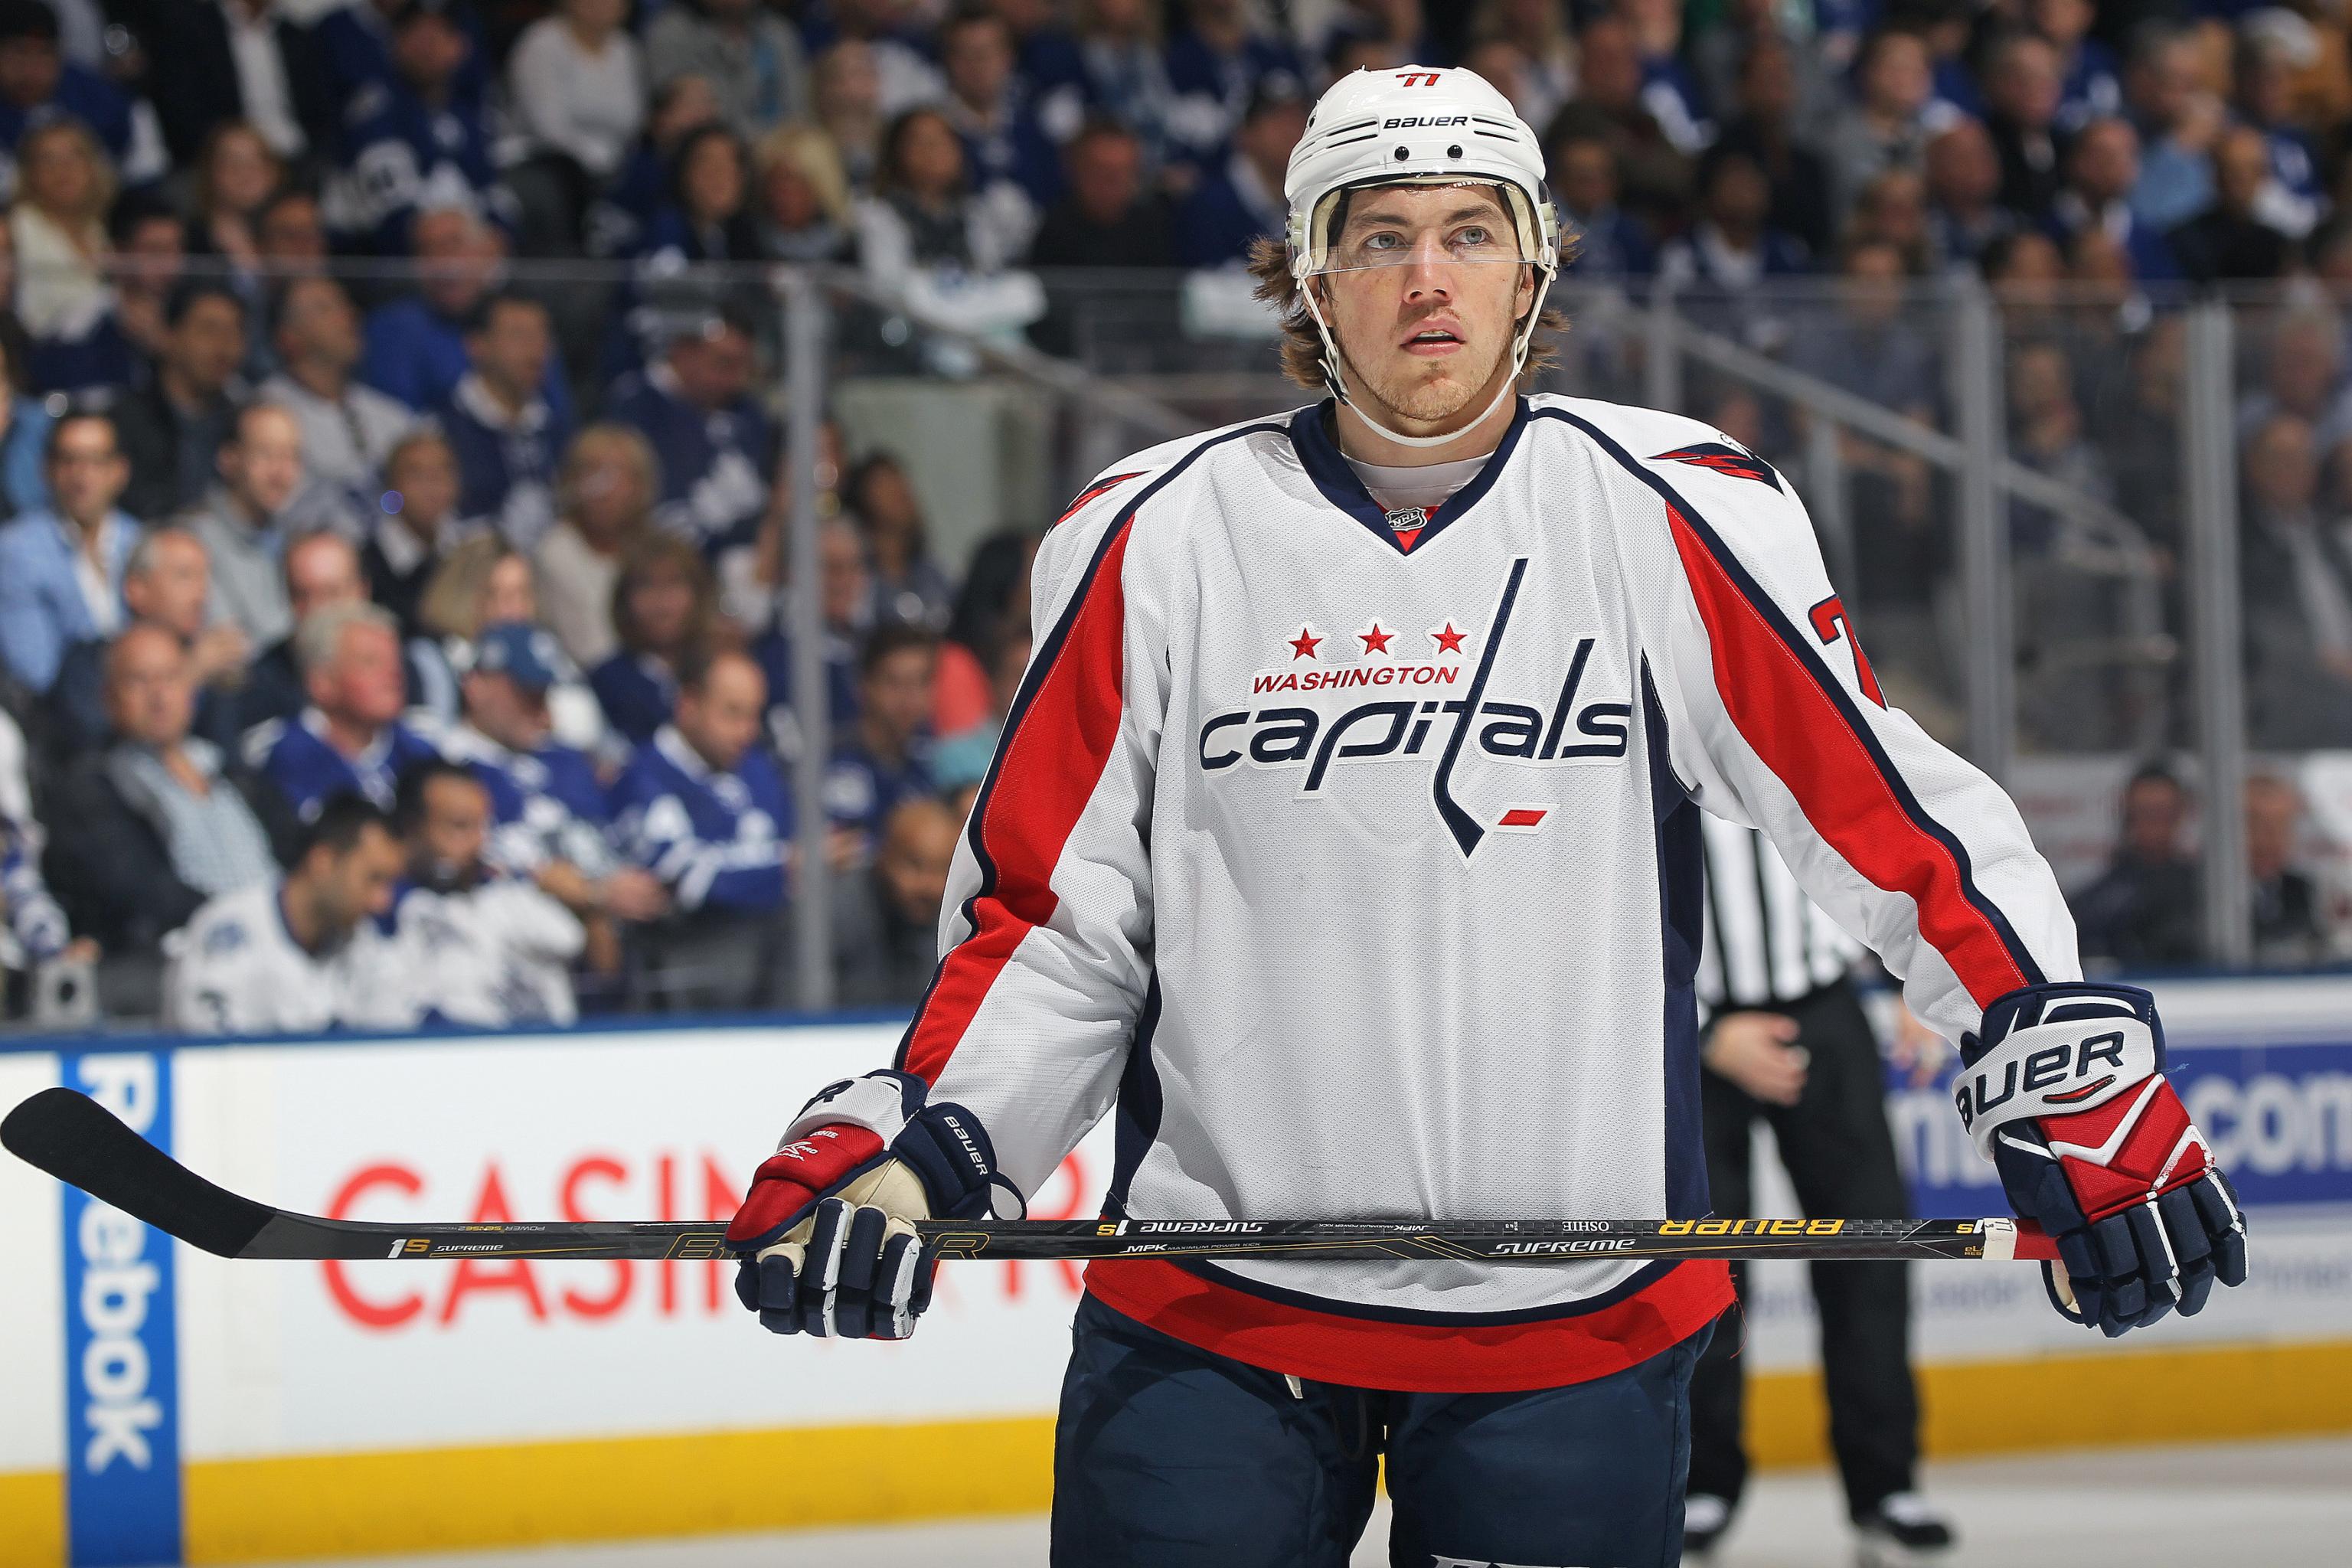 NHL All-Star Game: Top 3 bold predictions for T.J. Oshie